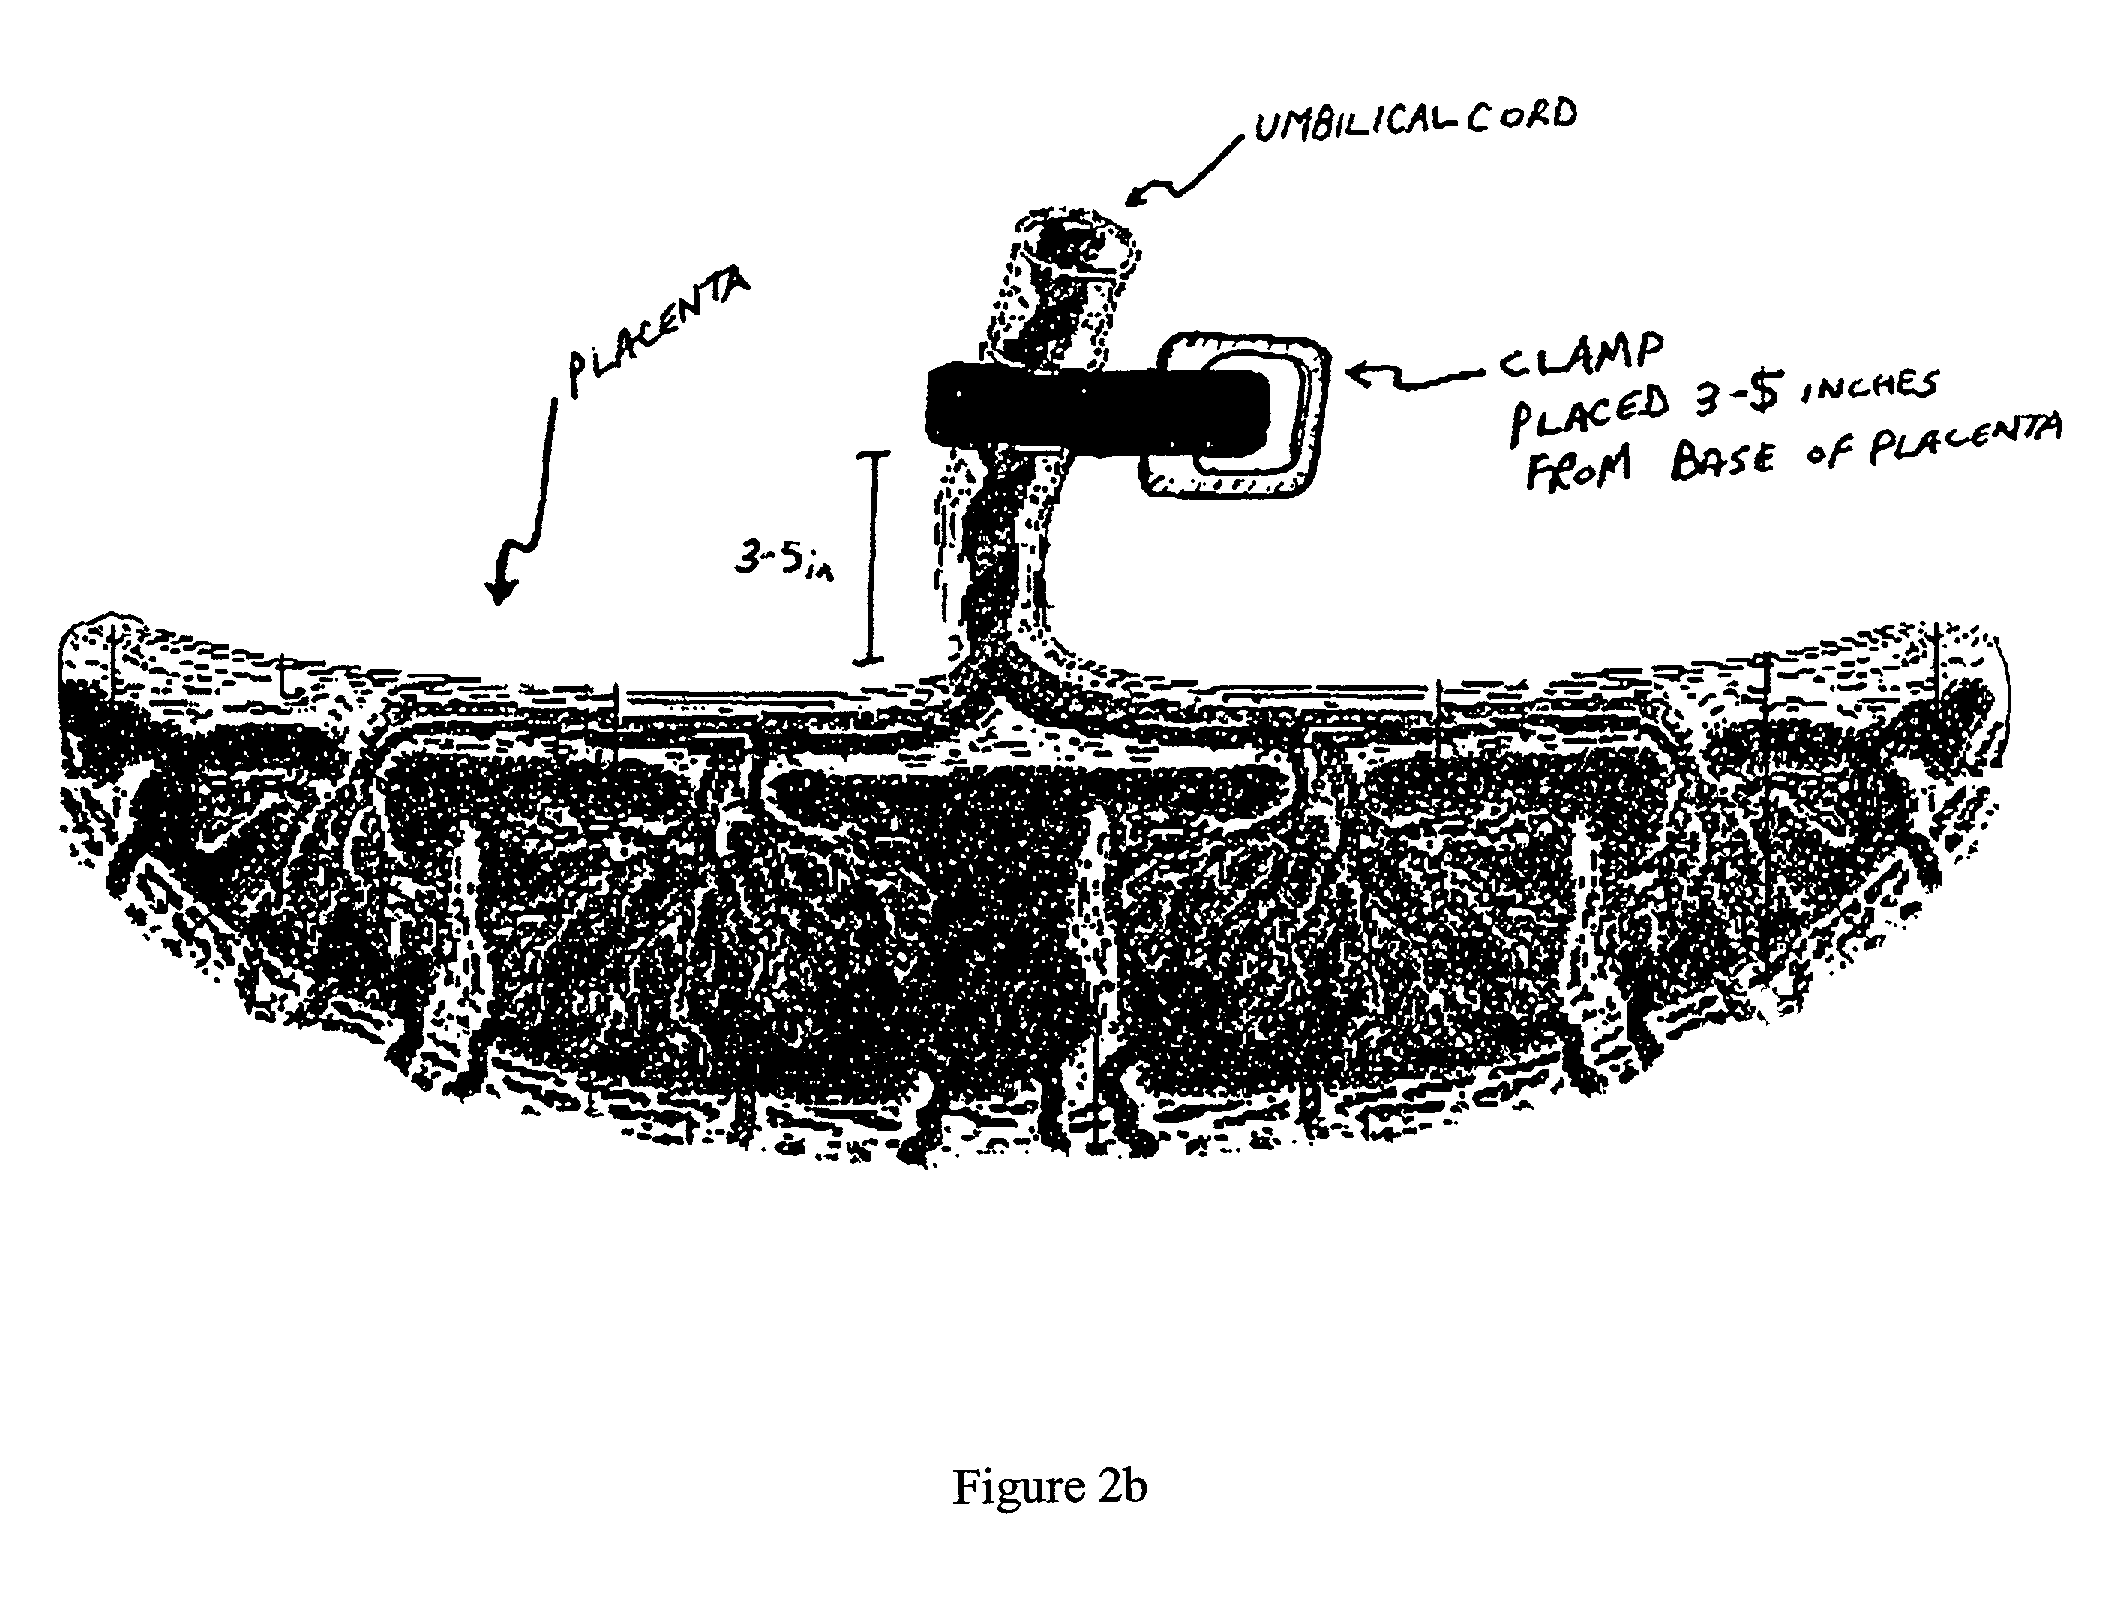 Method of collecting placental stem cells